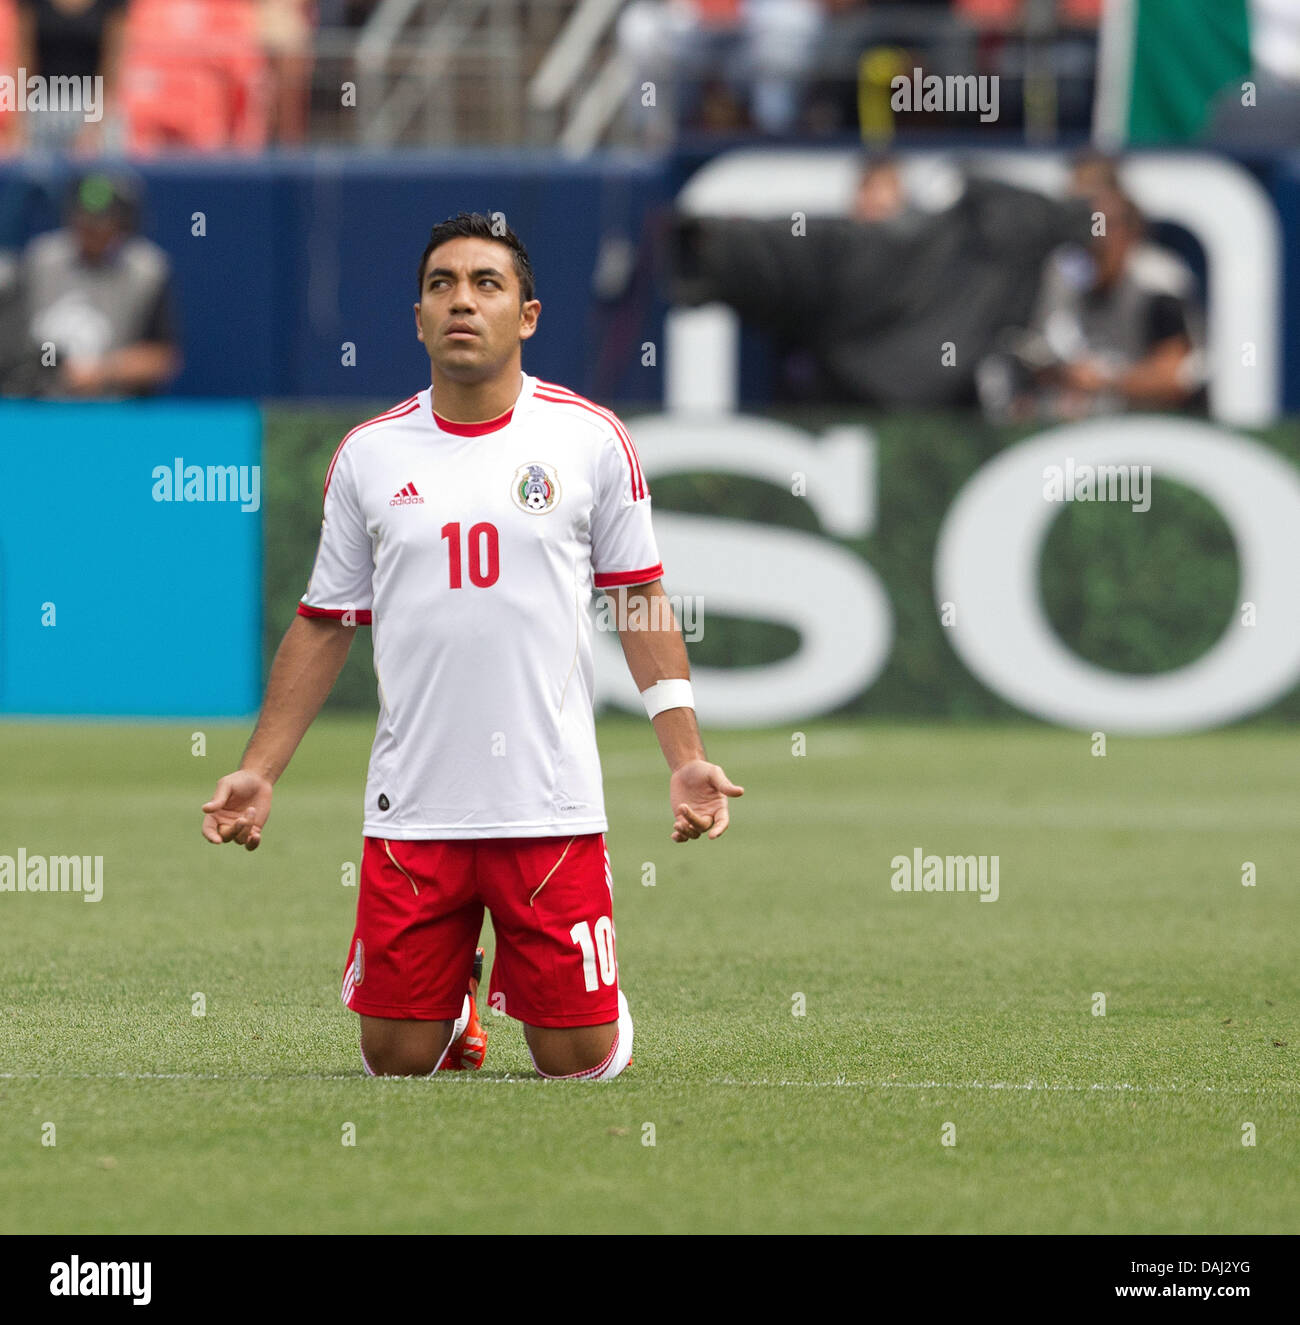 Denver, Colorado, USA. 14th July, 2013. Mexico's MARCO FABIAN kneels to pray before the match between Mexico and Martinique at Sports Authority Field at Mile High Sunday afternoon. Mexico defeats Martinique 3-1. Credit:  Hector Acevedo/ZUMAPRESS.com/Alamy Live News Stock Photo